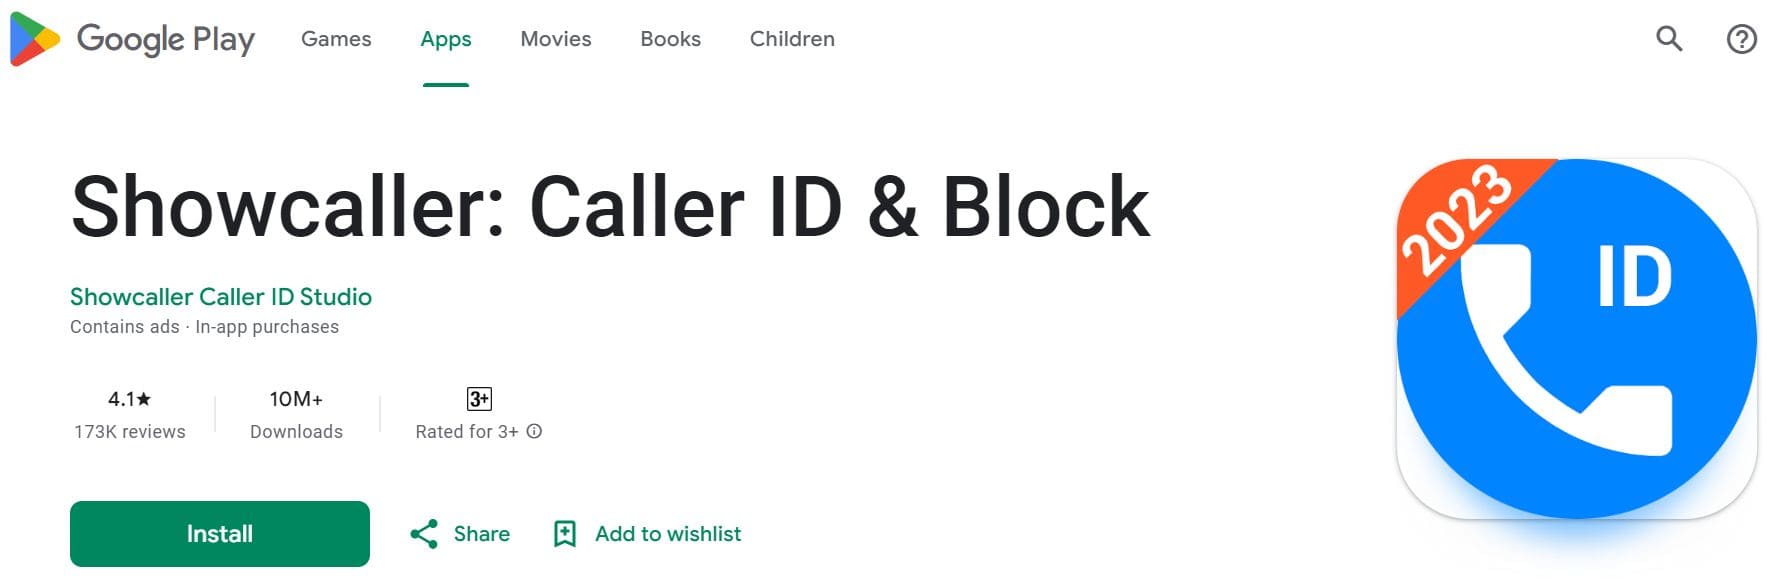 View of the Showcaller: Caller ID & Block app in the Playmarket with information about the app and an install button